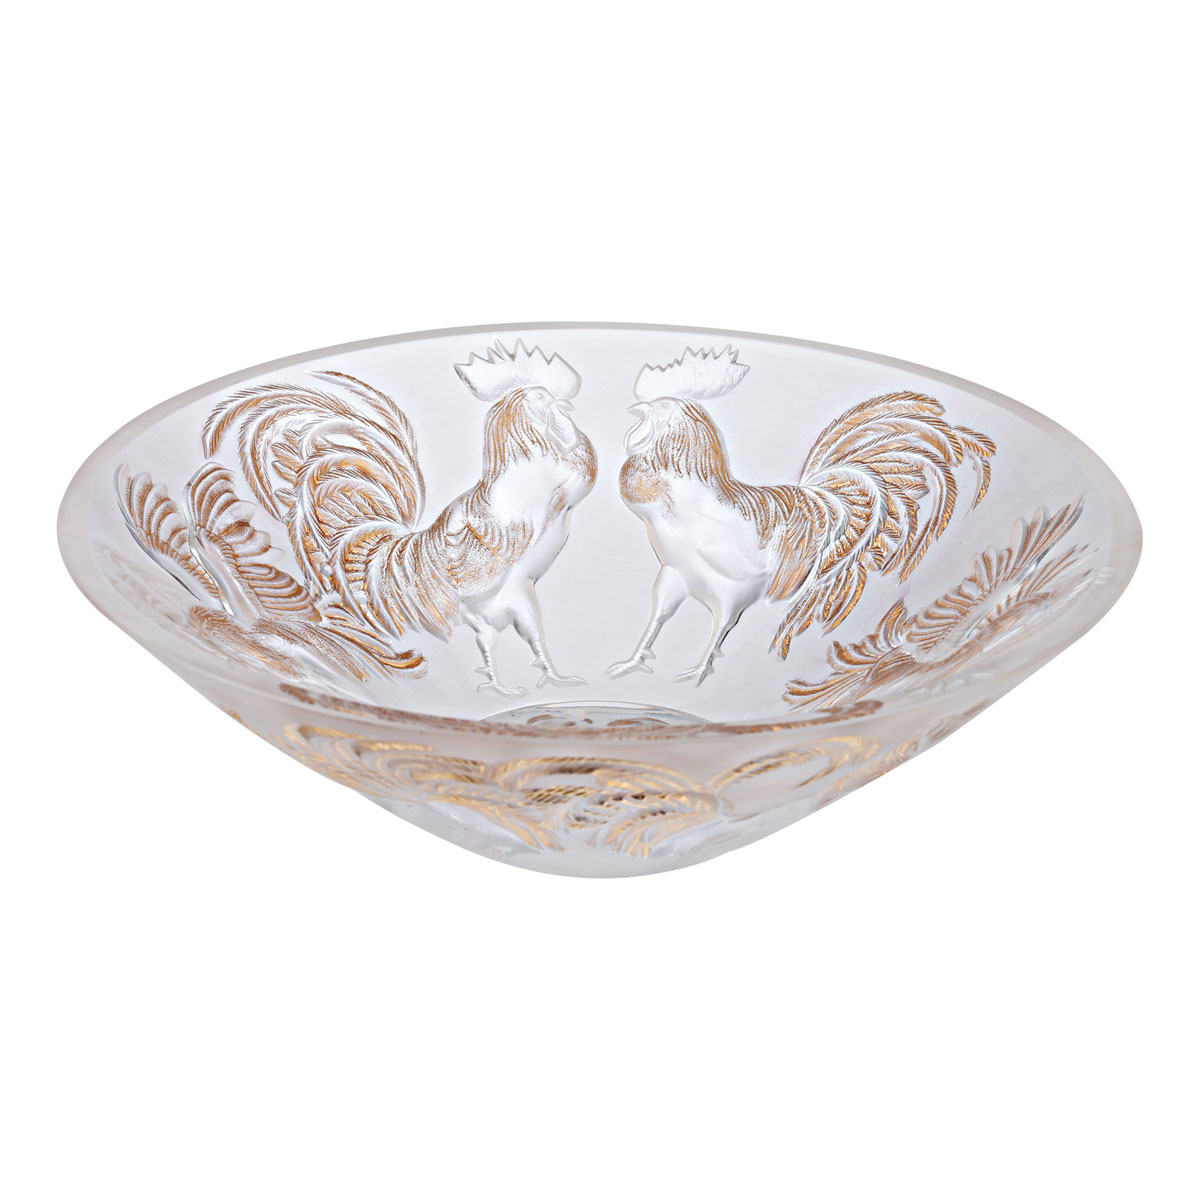 Lalique Zodiac Rooster Crystal Bowl, Clear And Gold Stamped, Limited Edition Of 888 Pieces